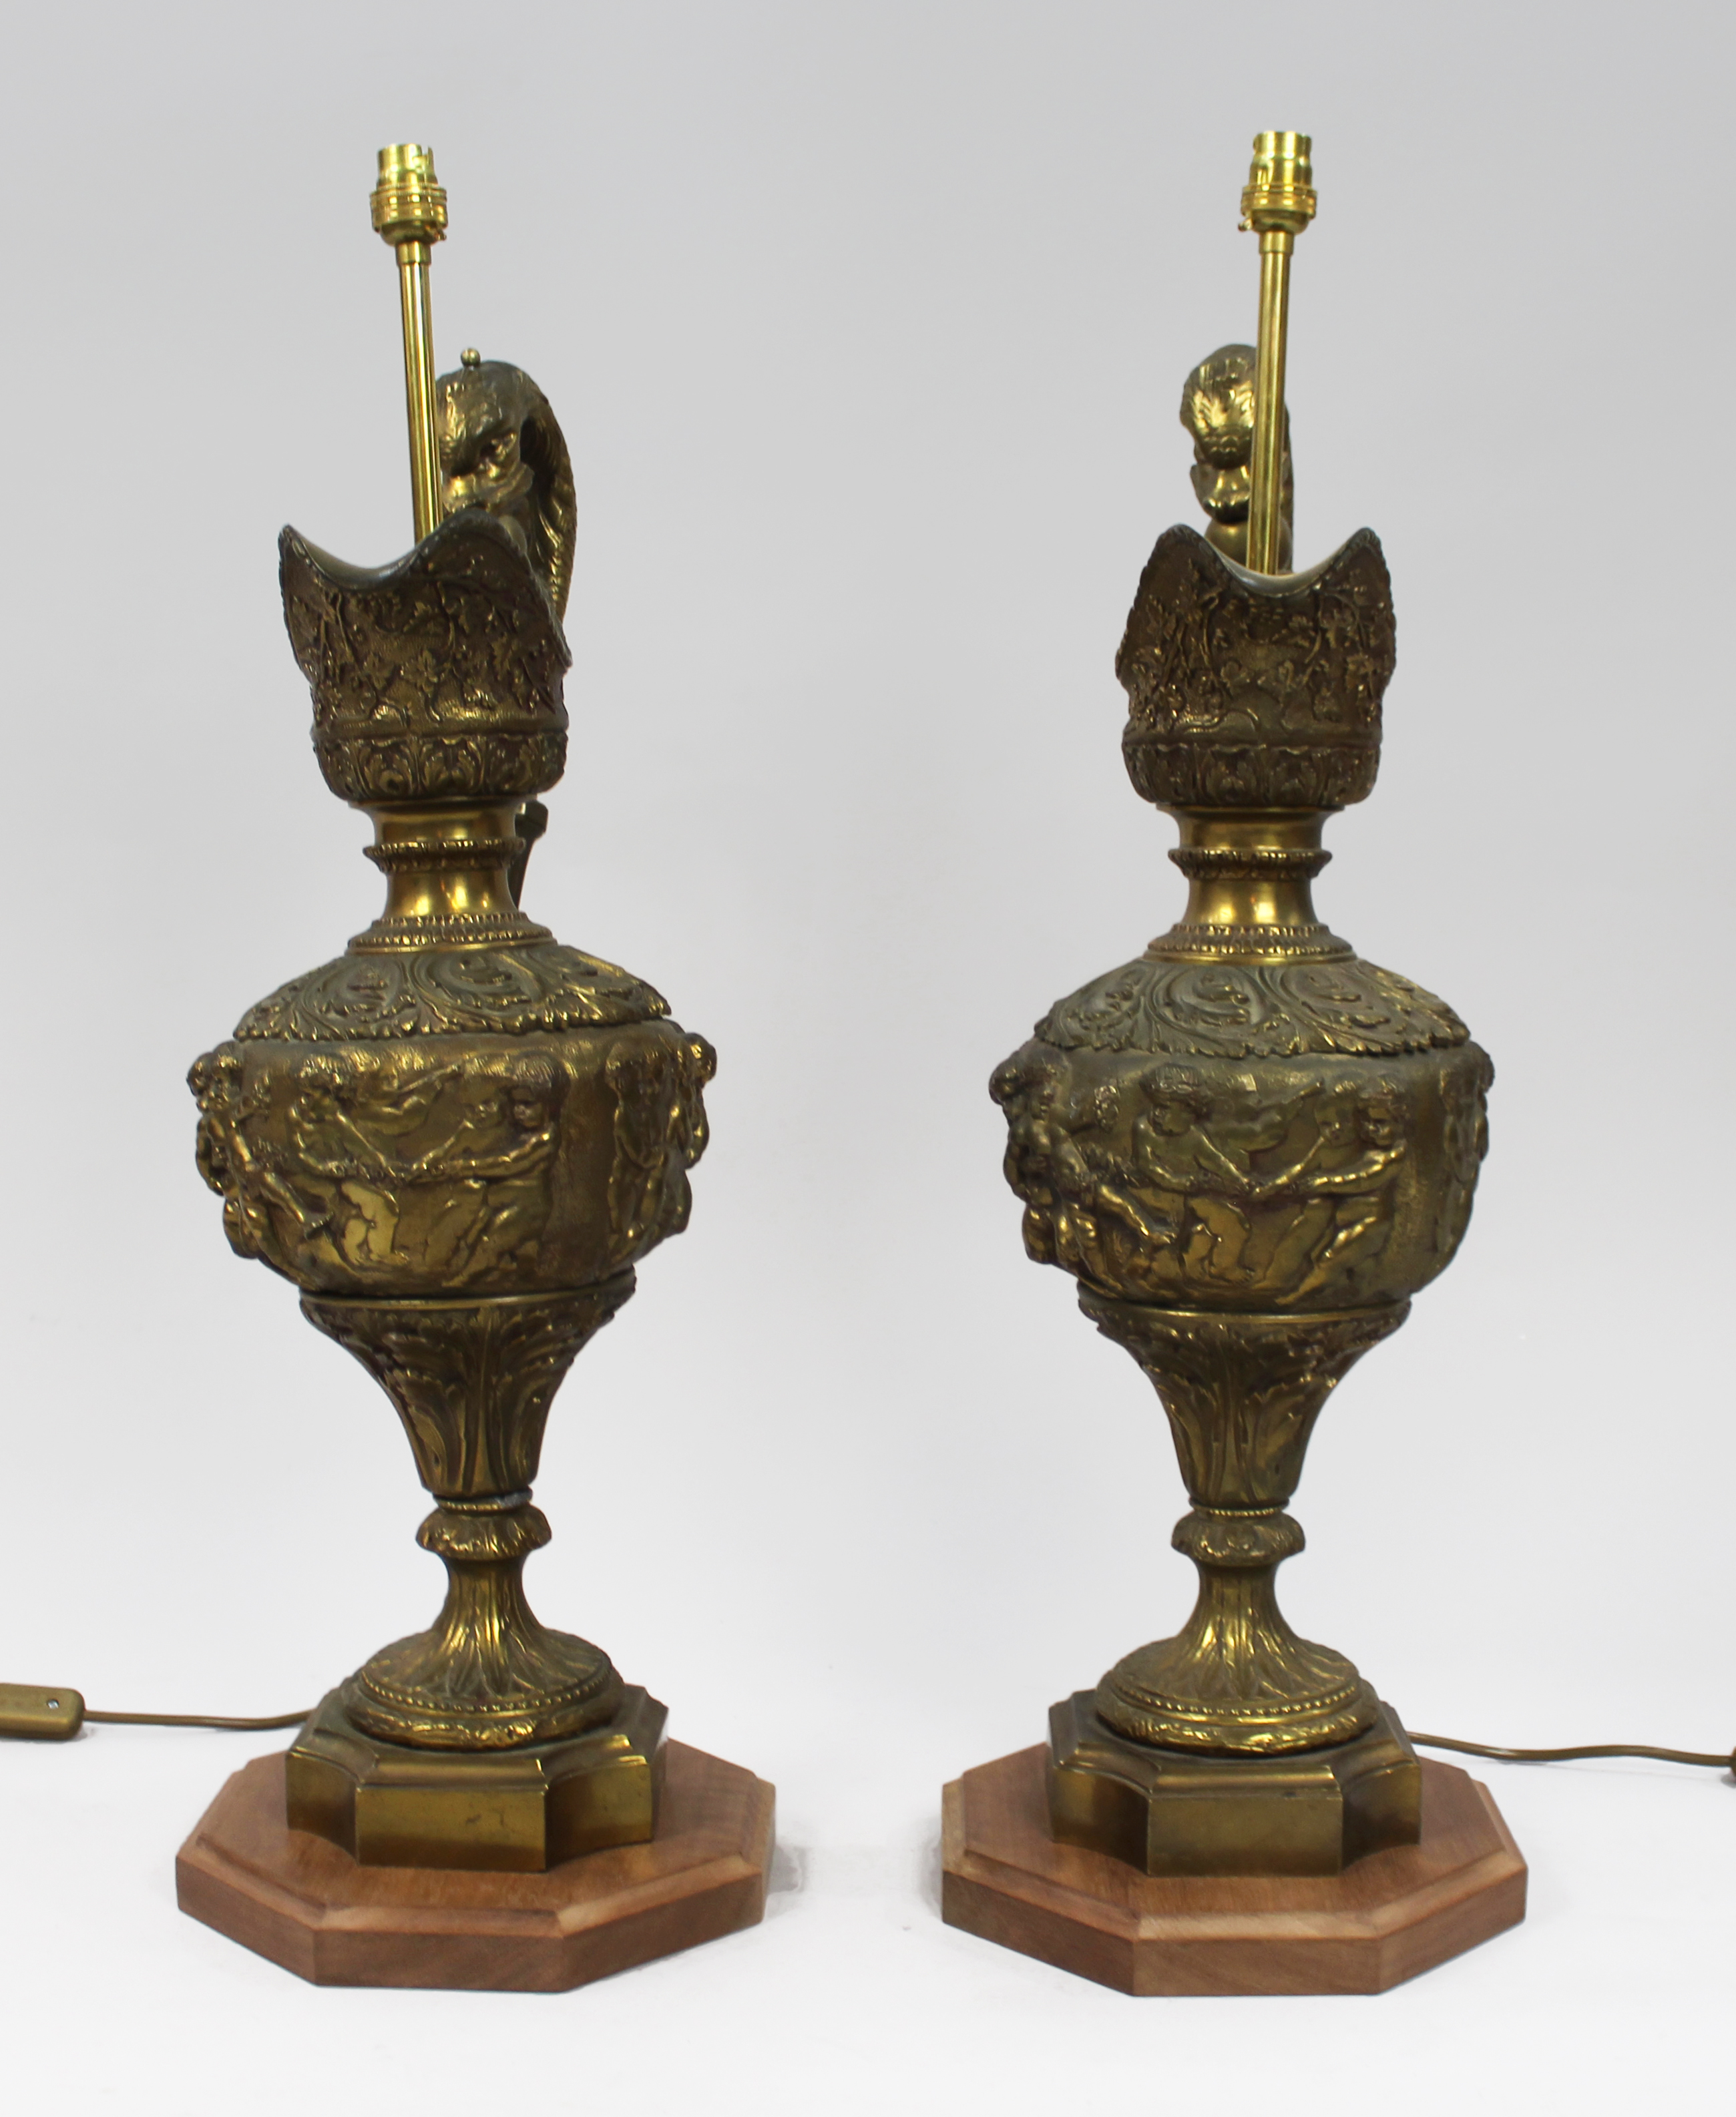 Pair of Large 19th c. Brass Ewer Table Lamps - Image 2 of 8